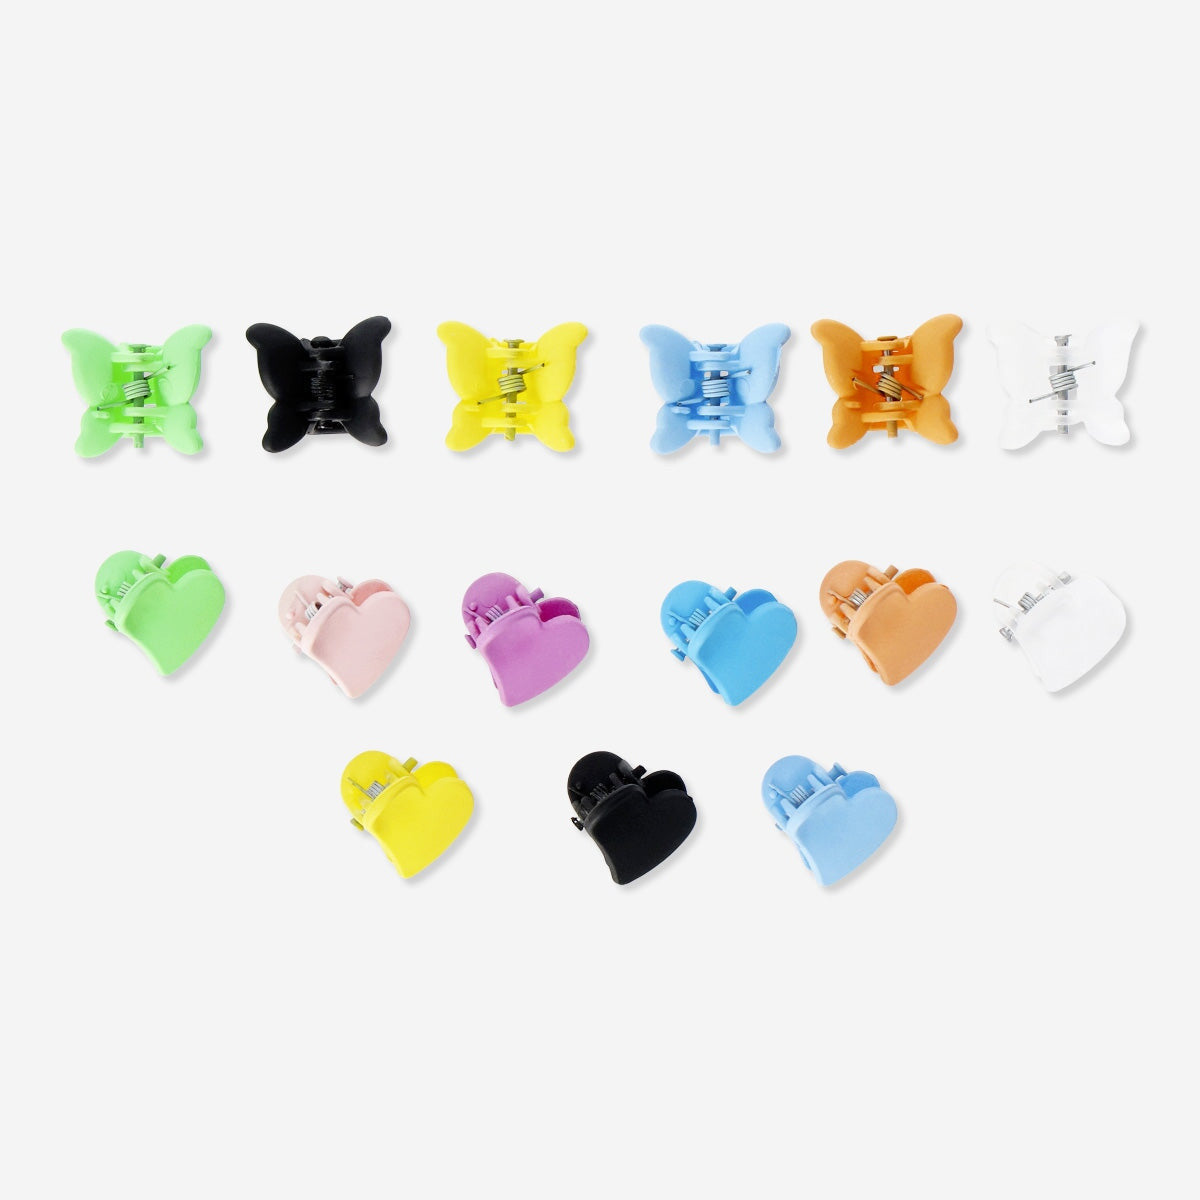 Hair clips. 60 pcs Personal care Flying Tiger Copenhagen 